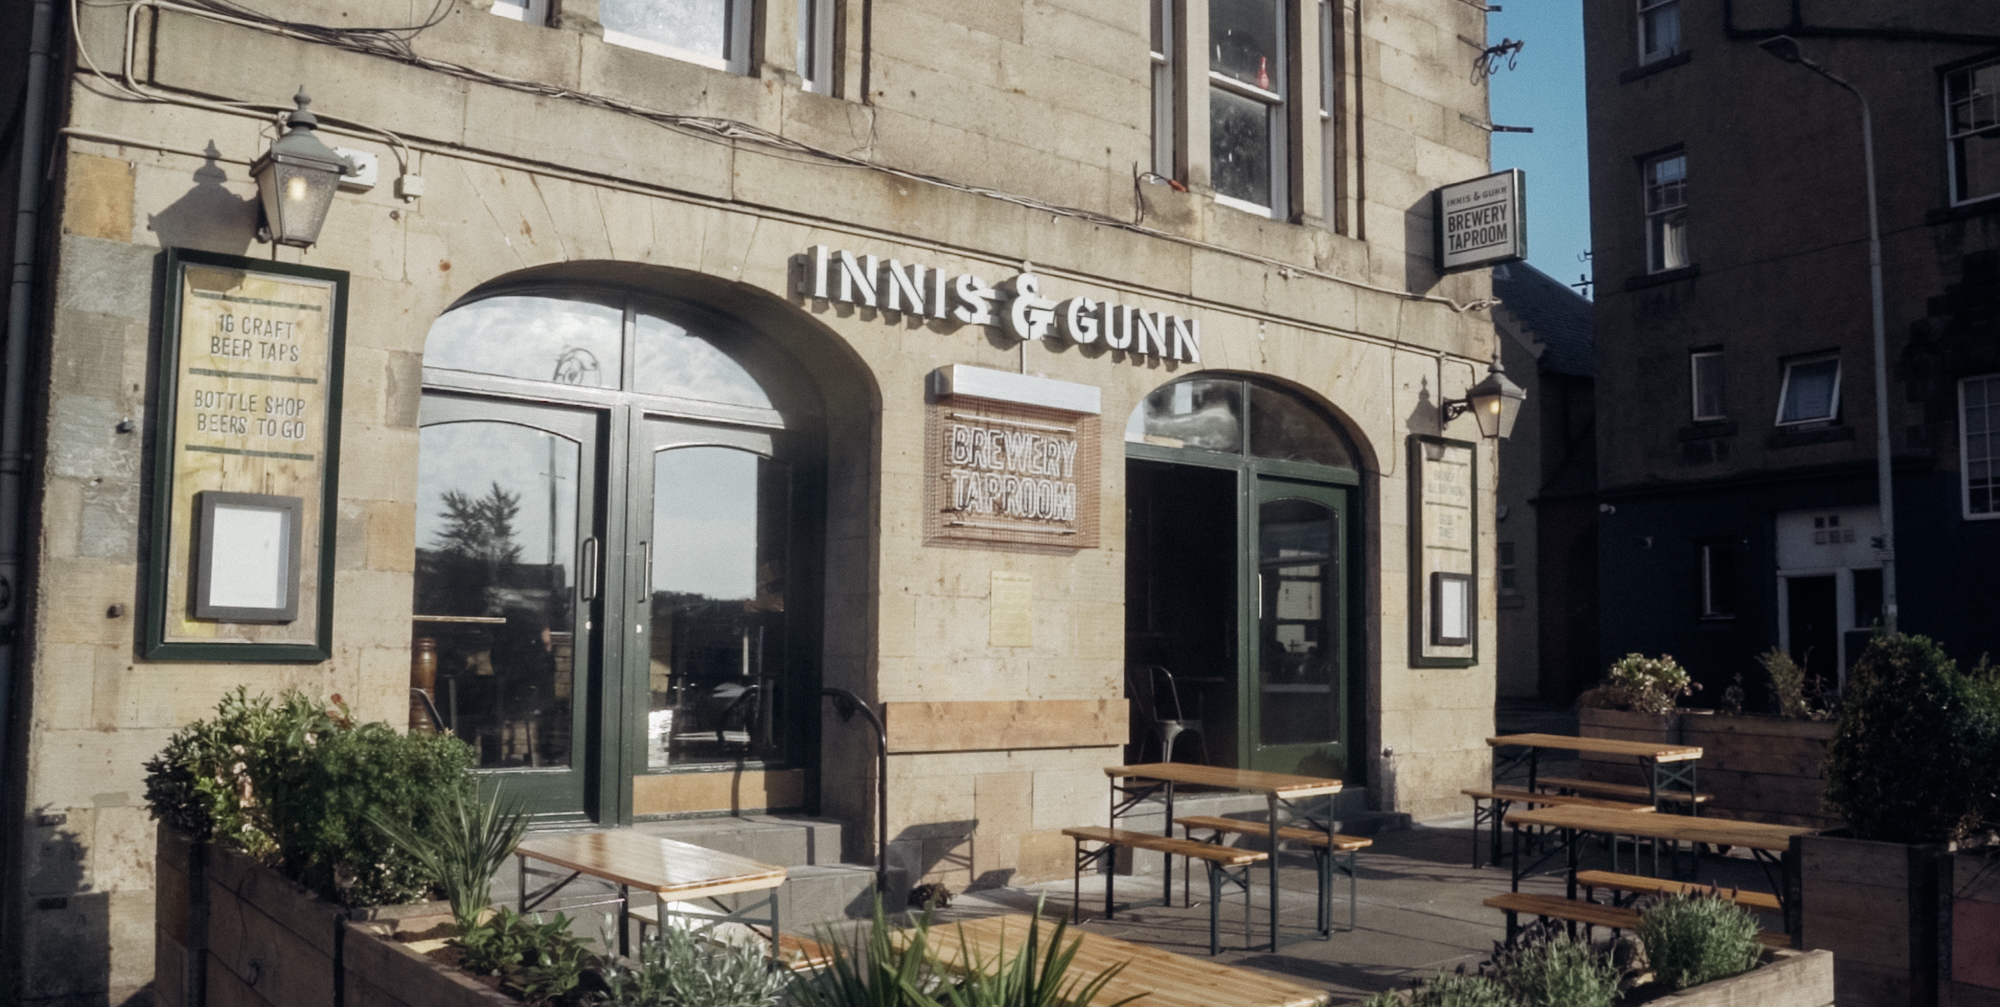 Innis & Gunn opens new Edinburgh taproom after strong first half of the year